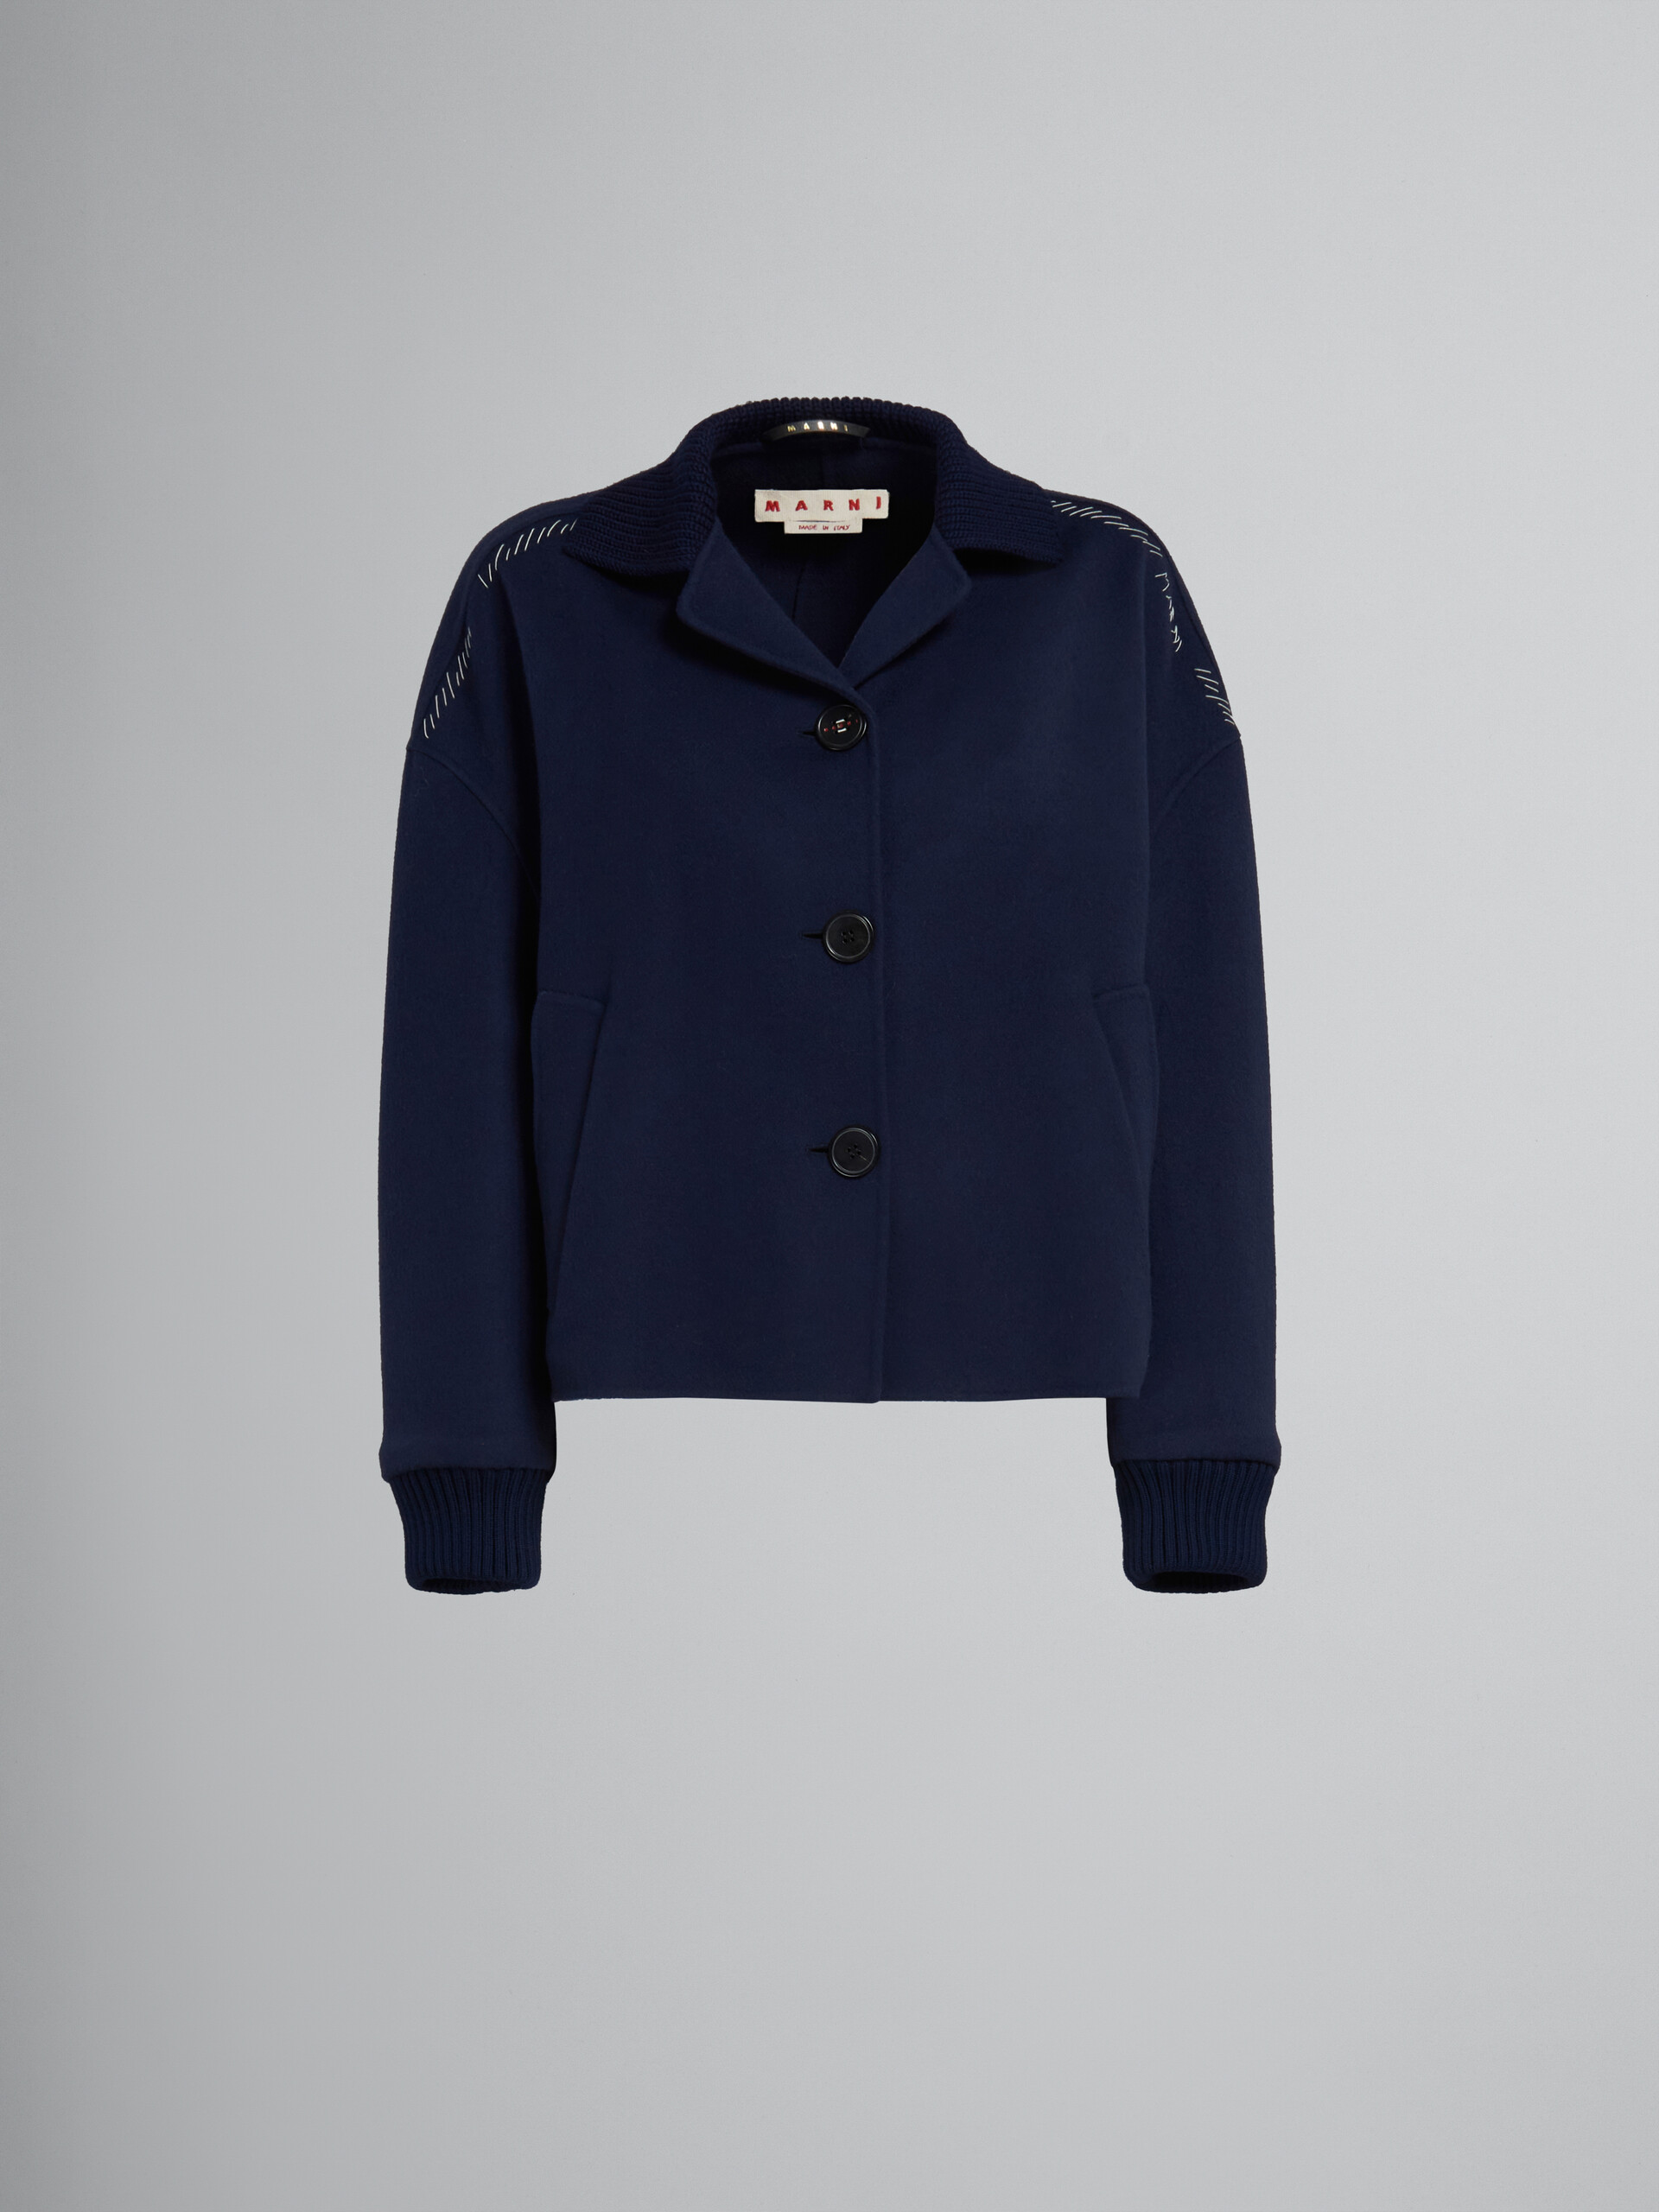 Deep blue wool and cashmere jacket with knit trims